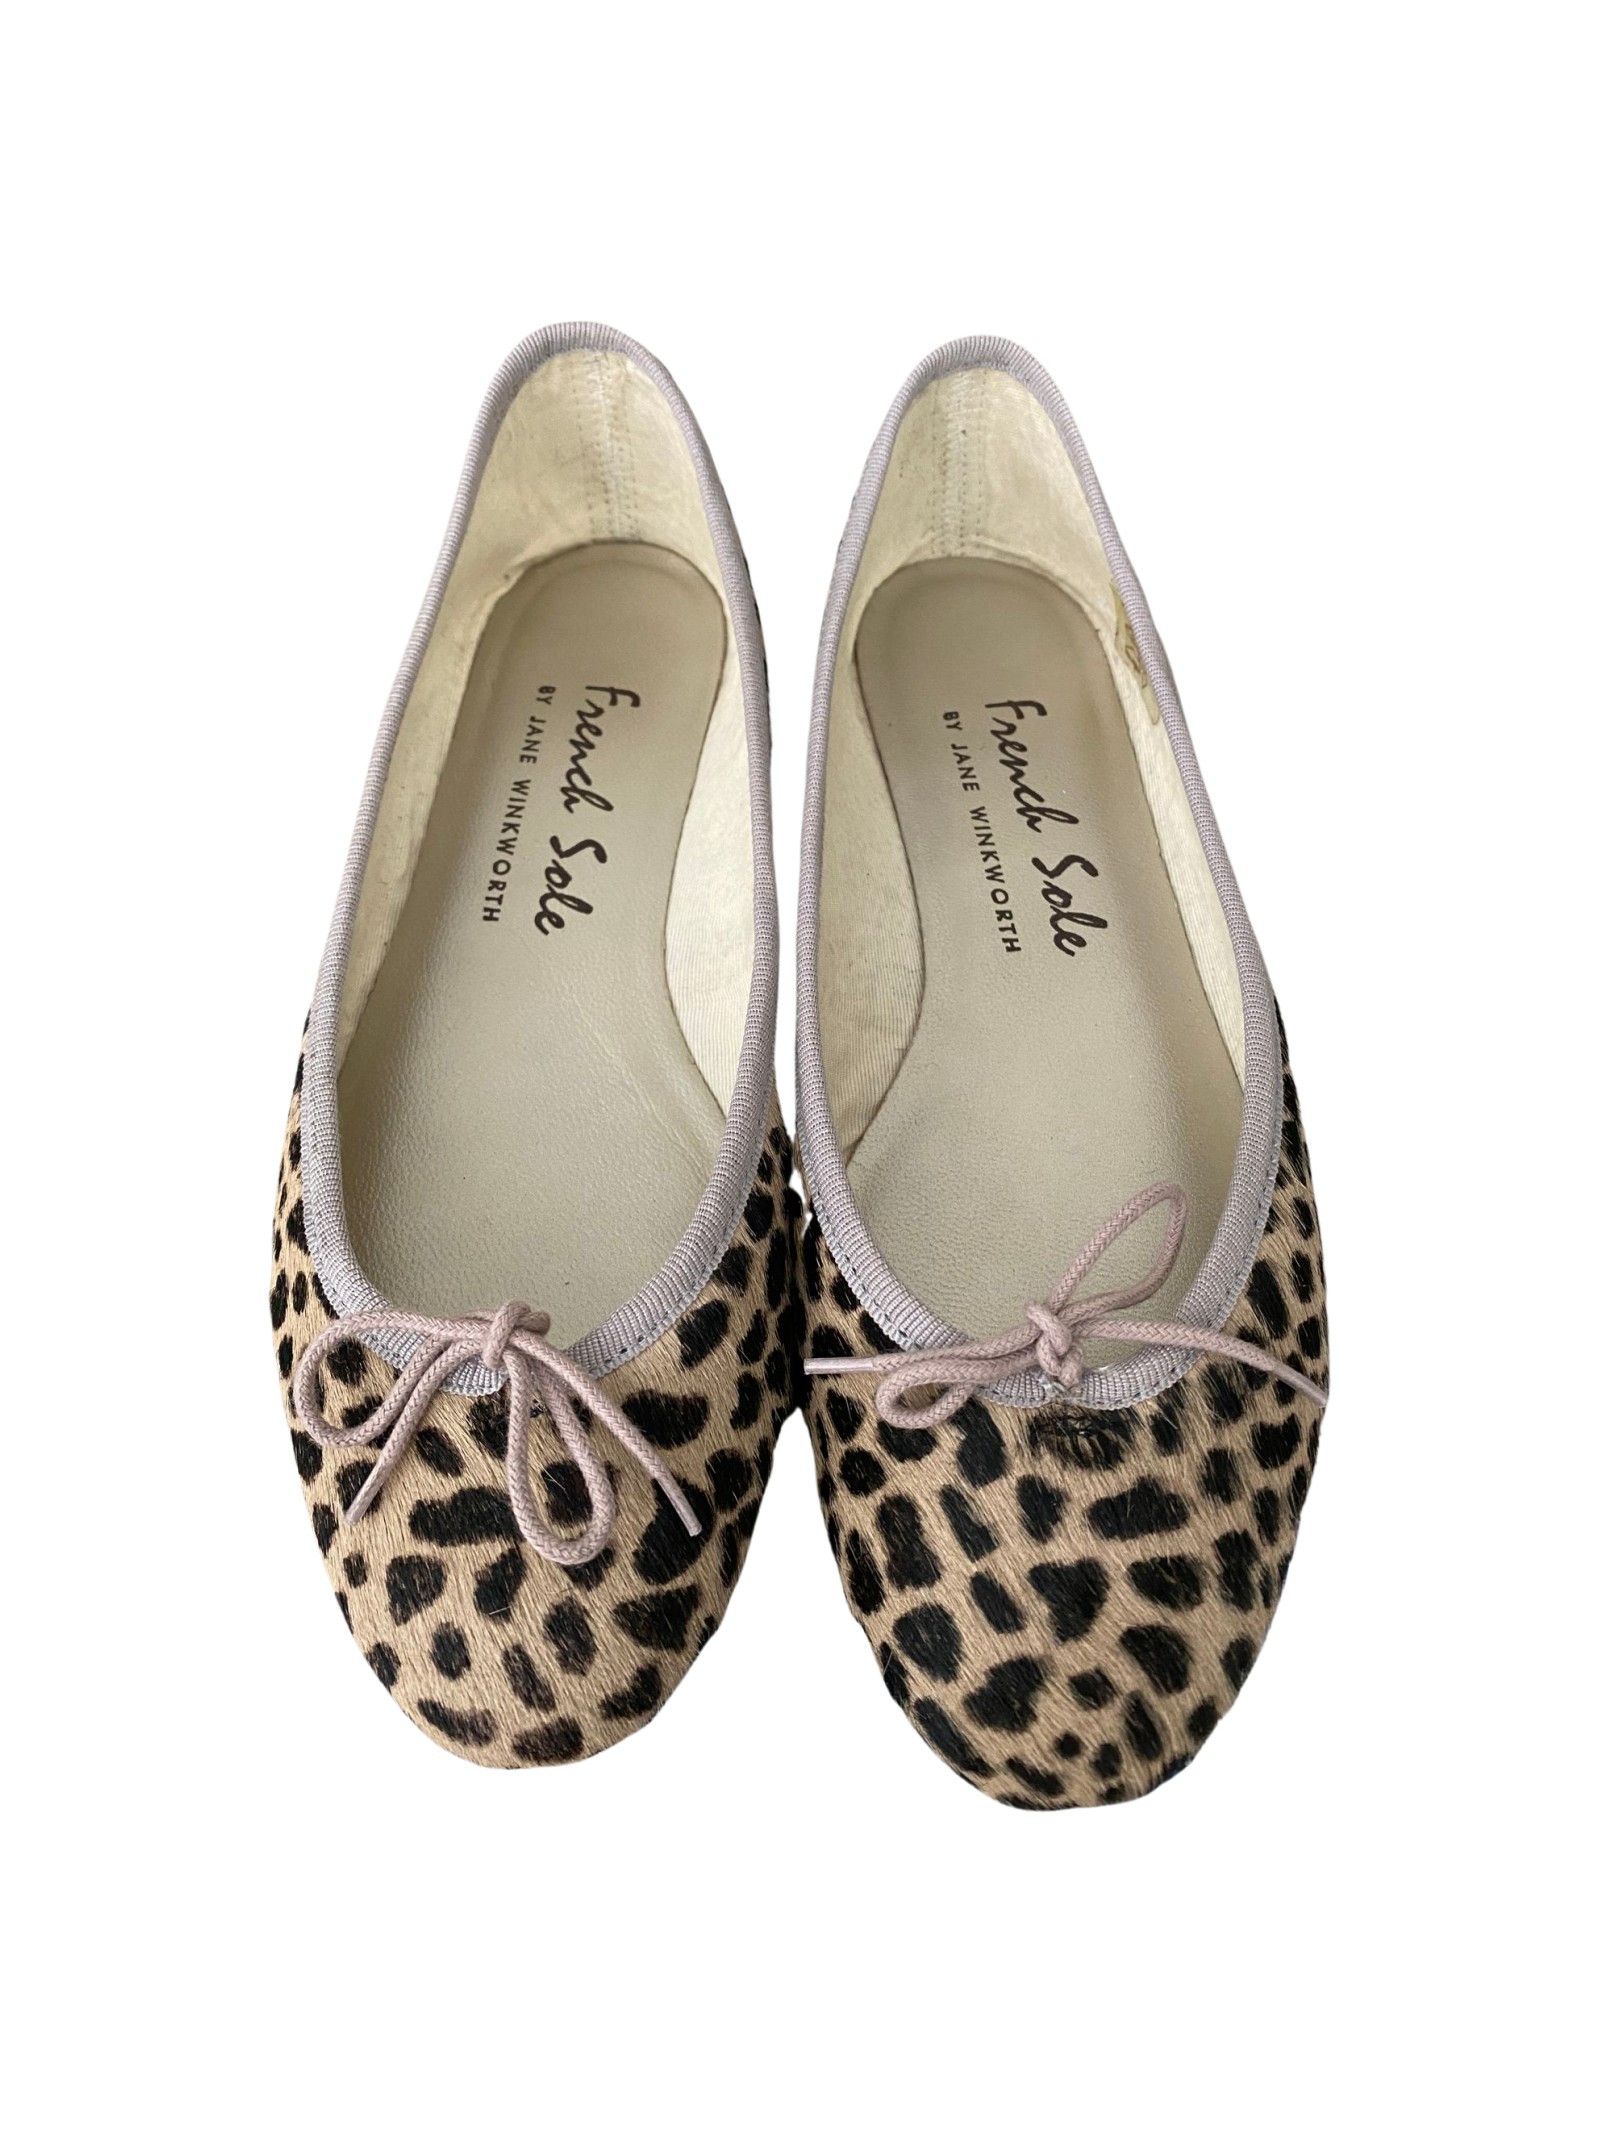 French Sole French Sole India Ballet Flats | Grailed